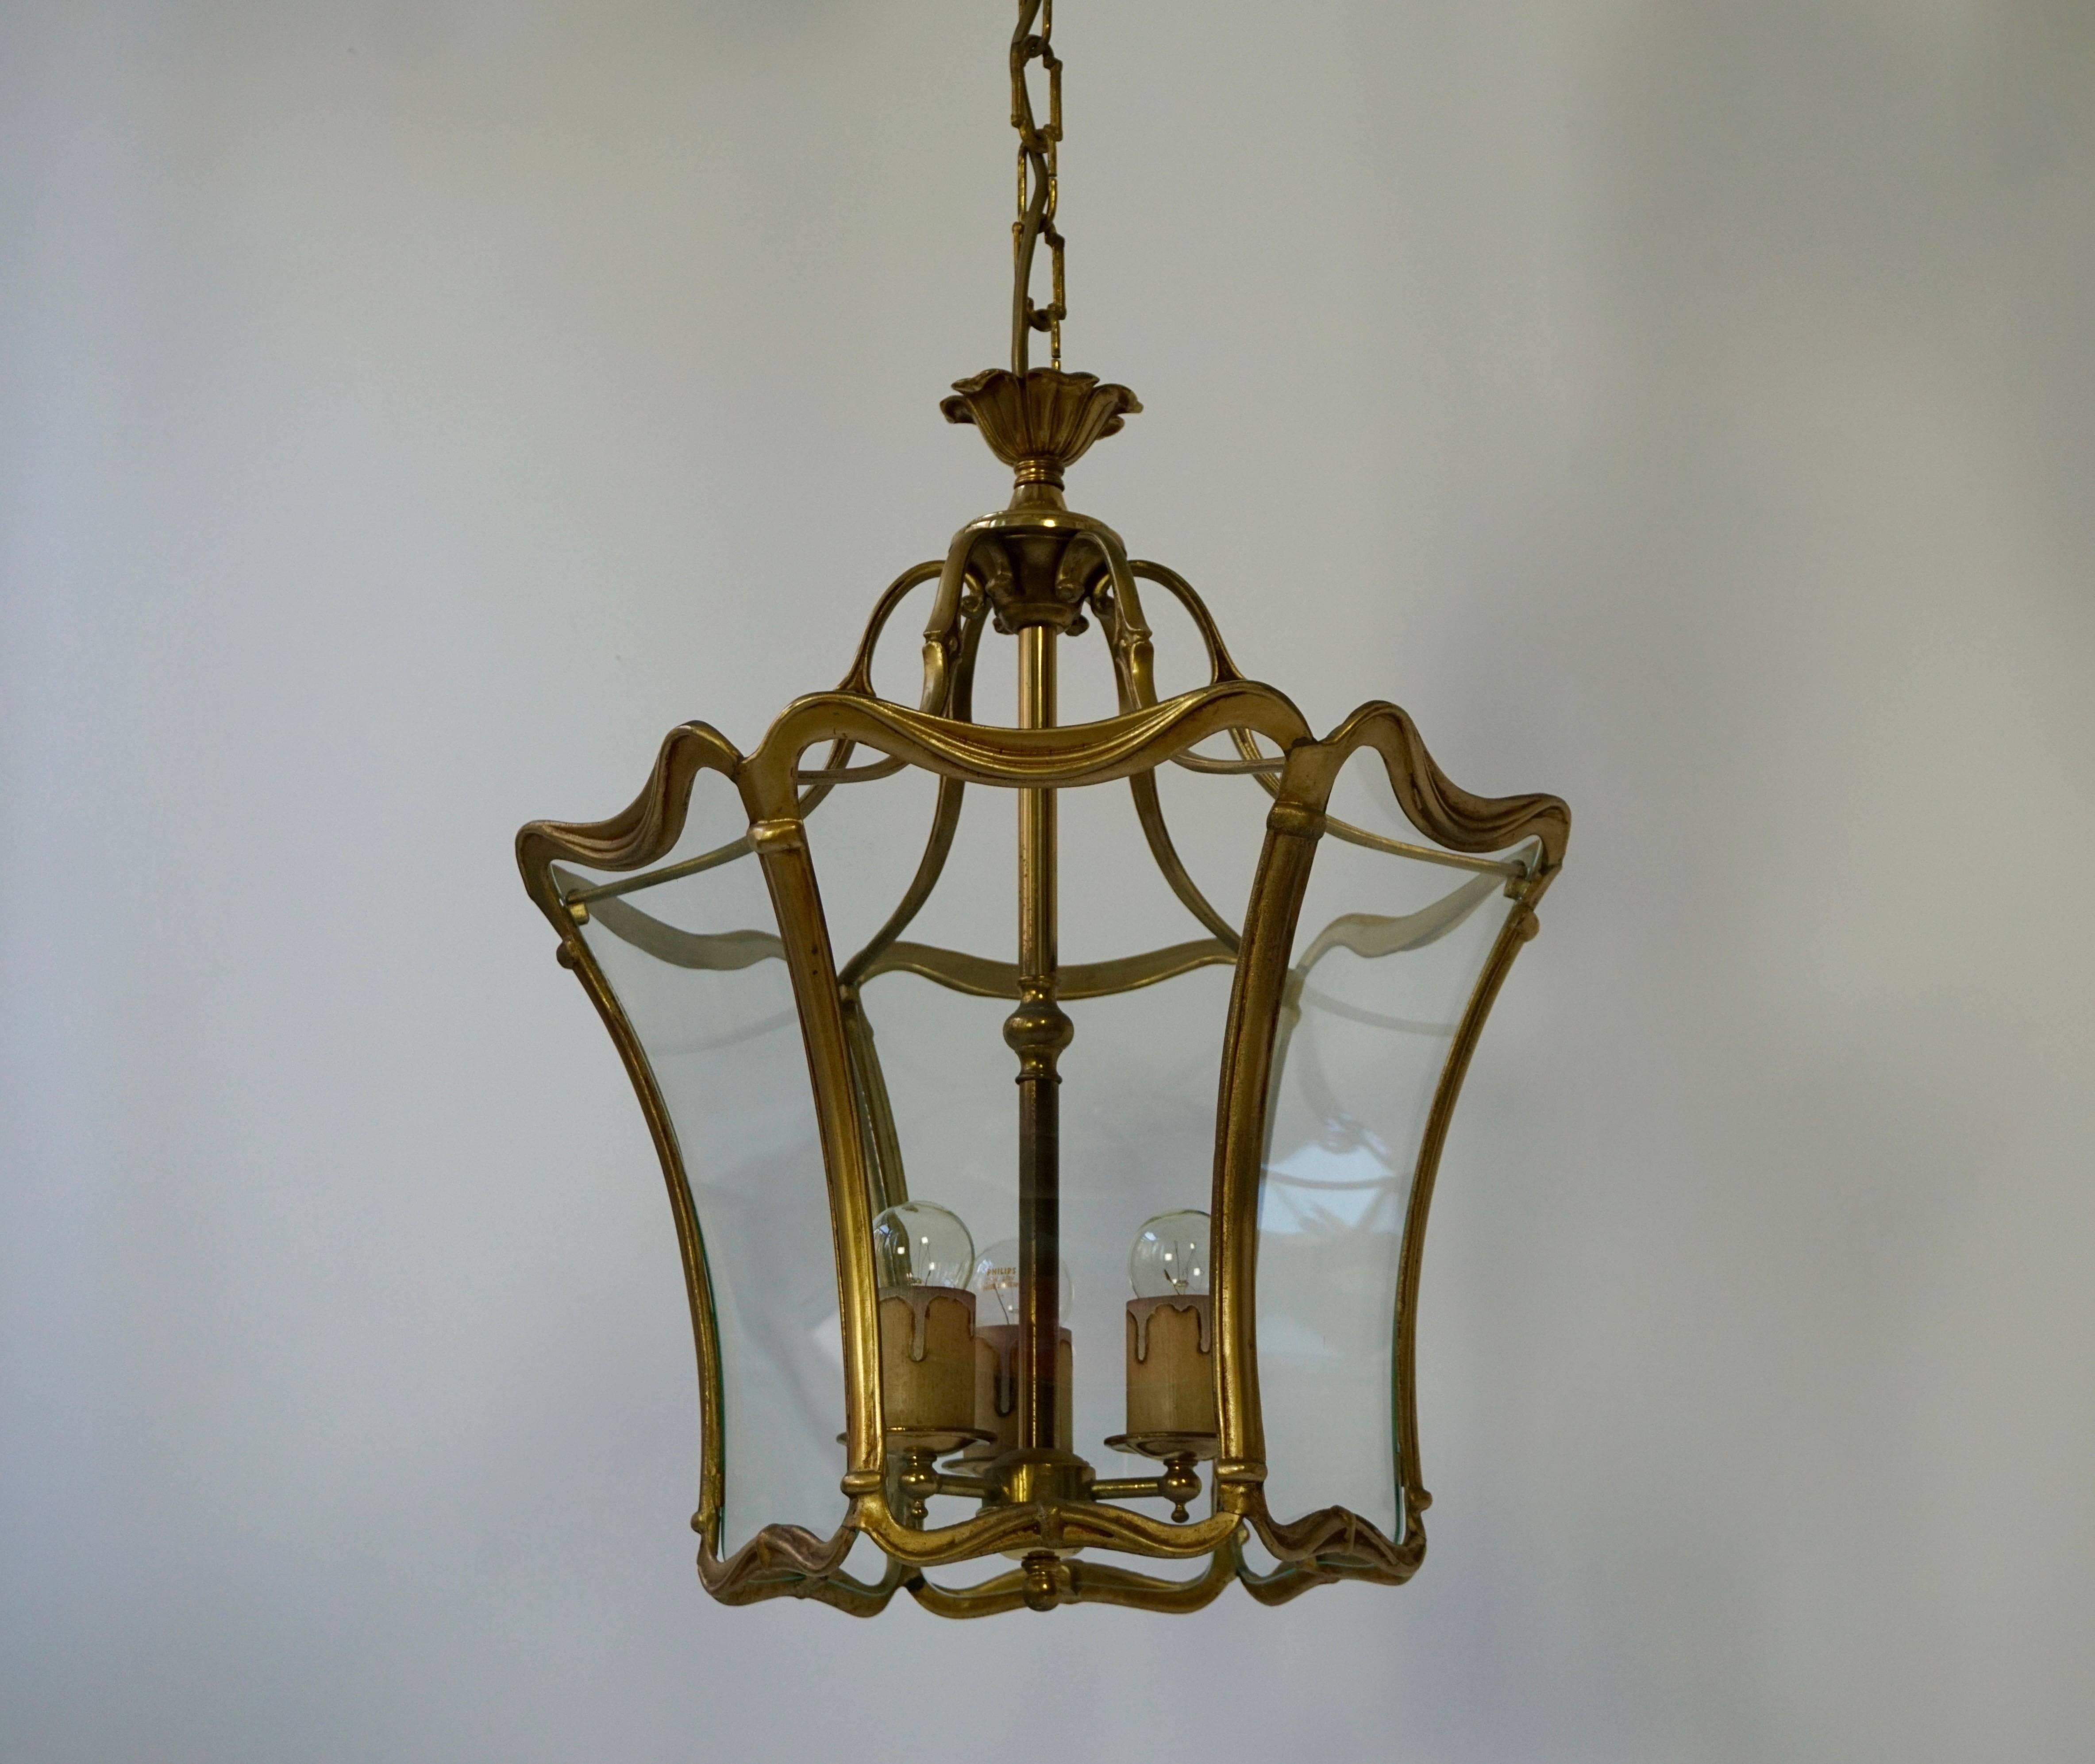 A lovely French Art Nouveau period bronze and glass hall lantern, France, 1900-1920. Bronze beautifully decorated with six glass panels.The lantern is in very good, condition, aged patina to bronze, rewired With three E27 single light bulb holders.